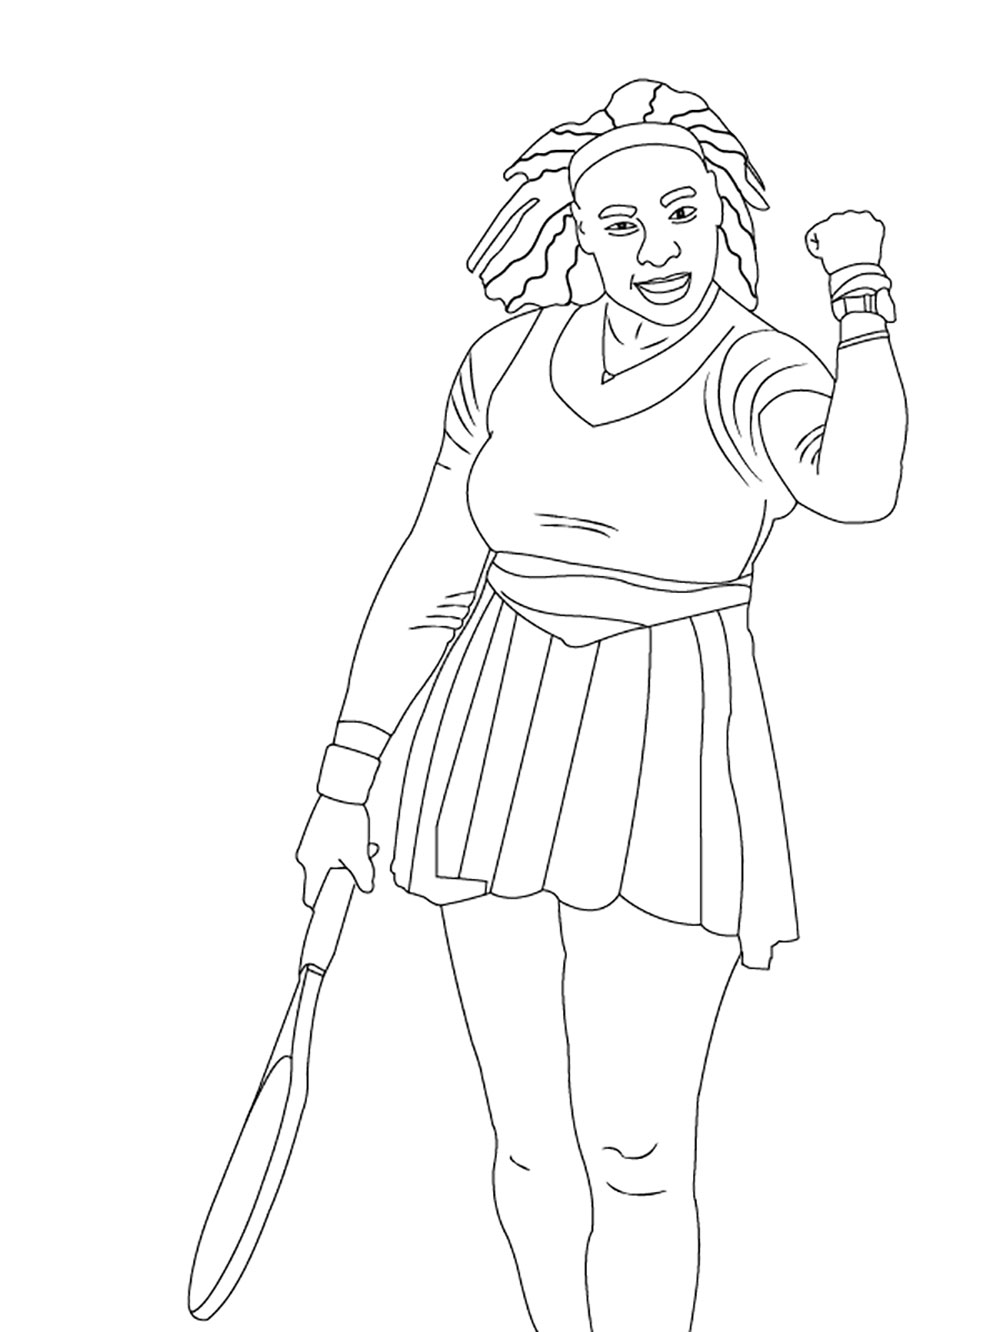 Serena williams coloring pages